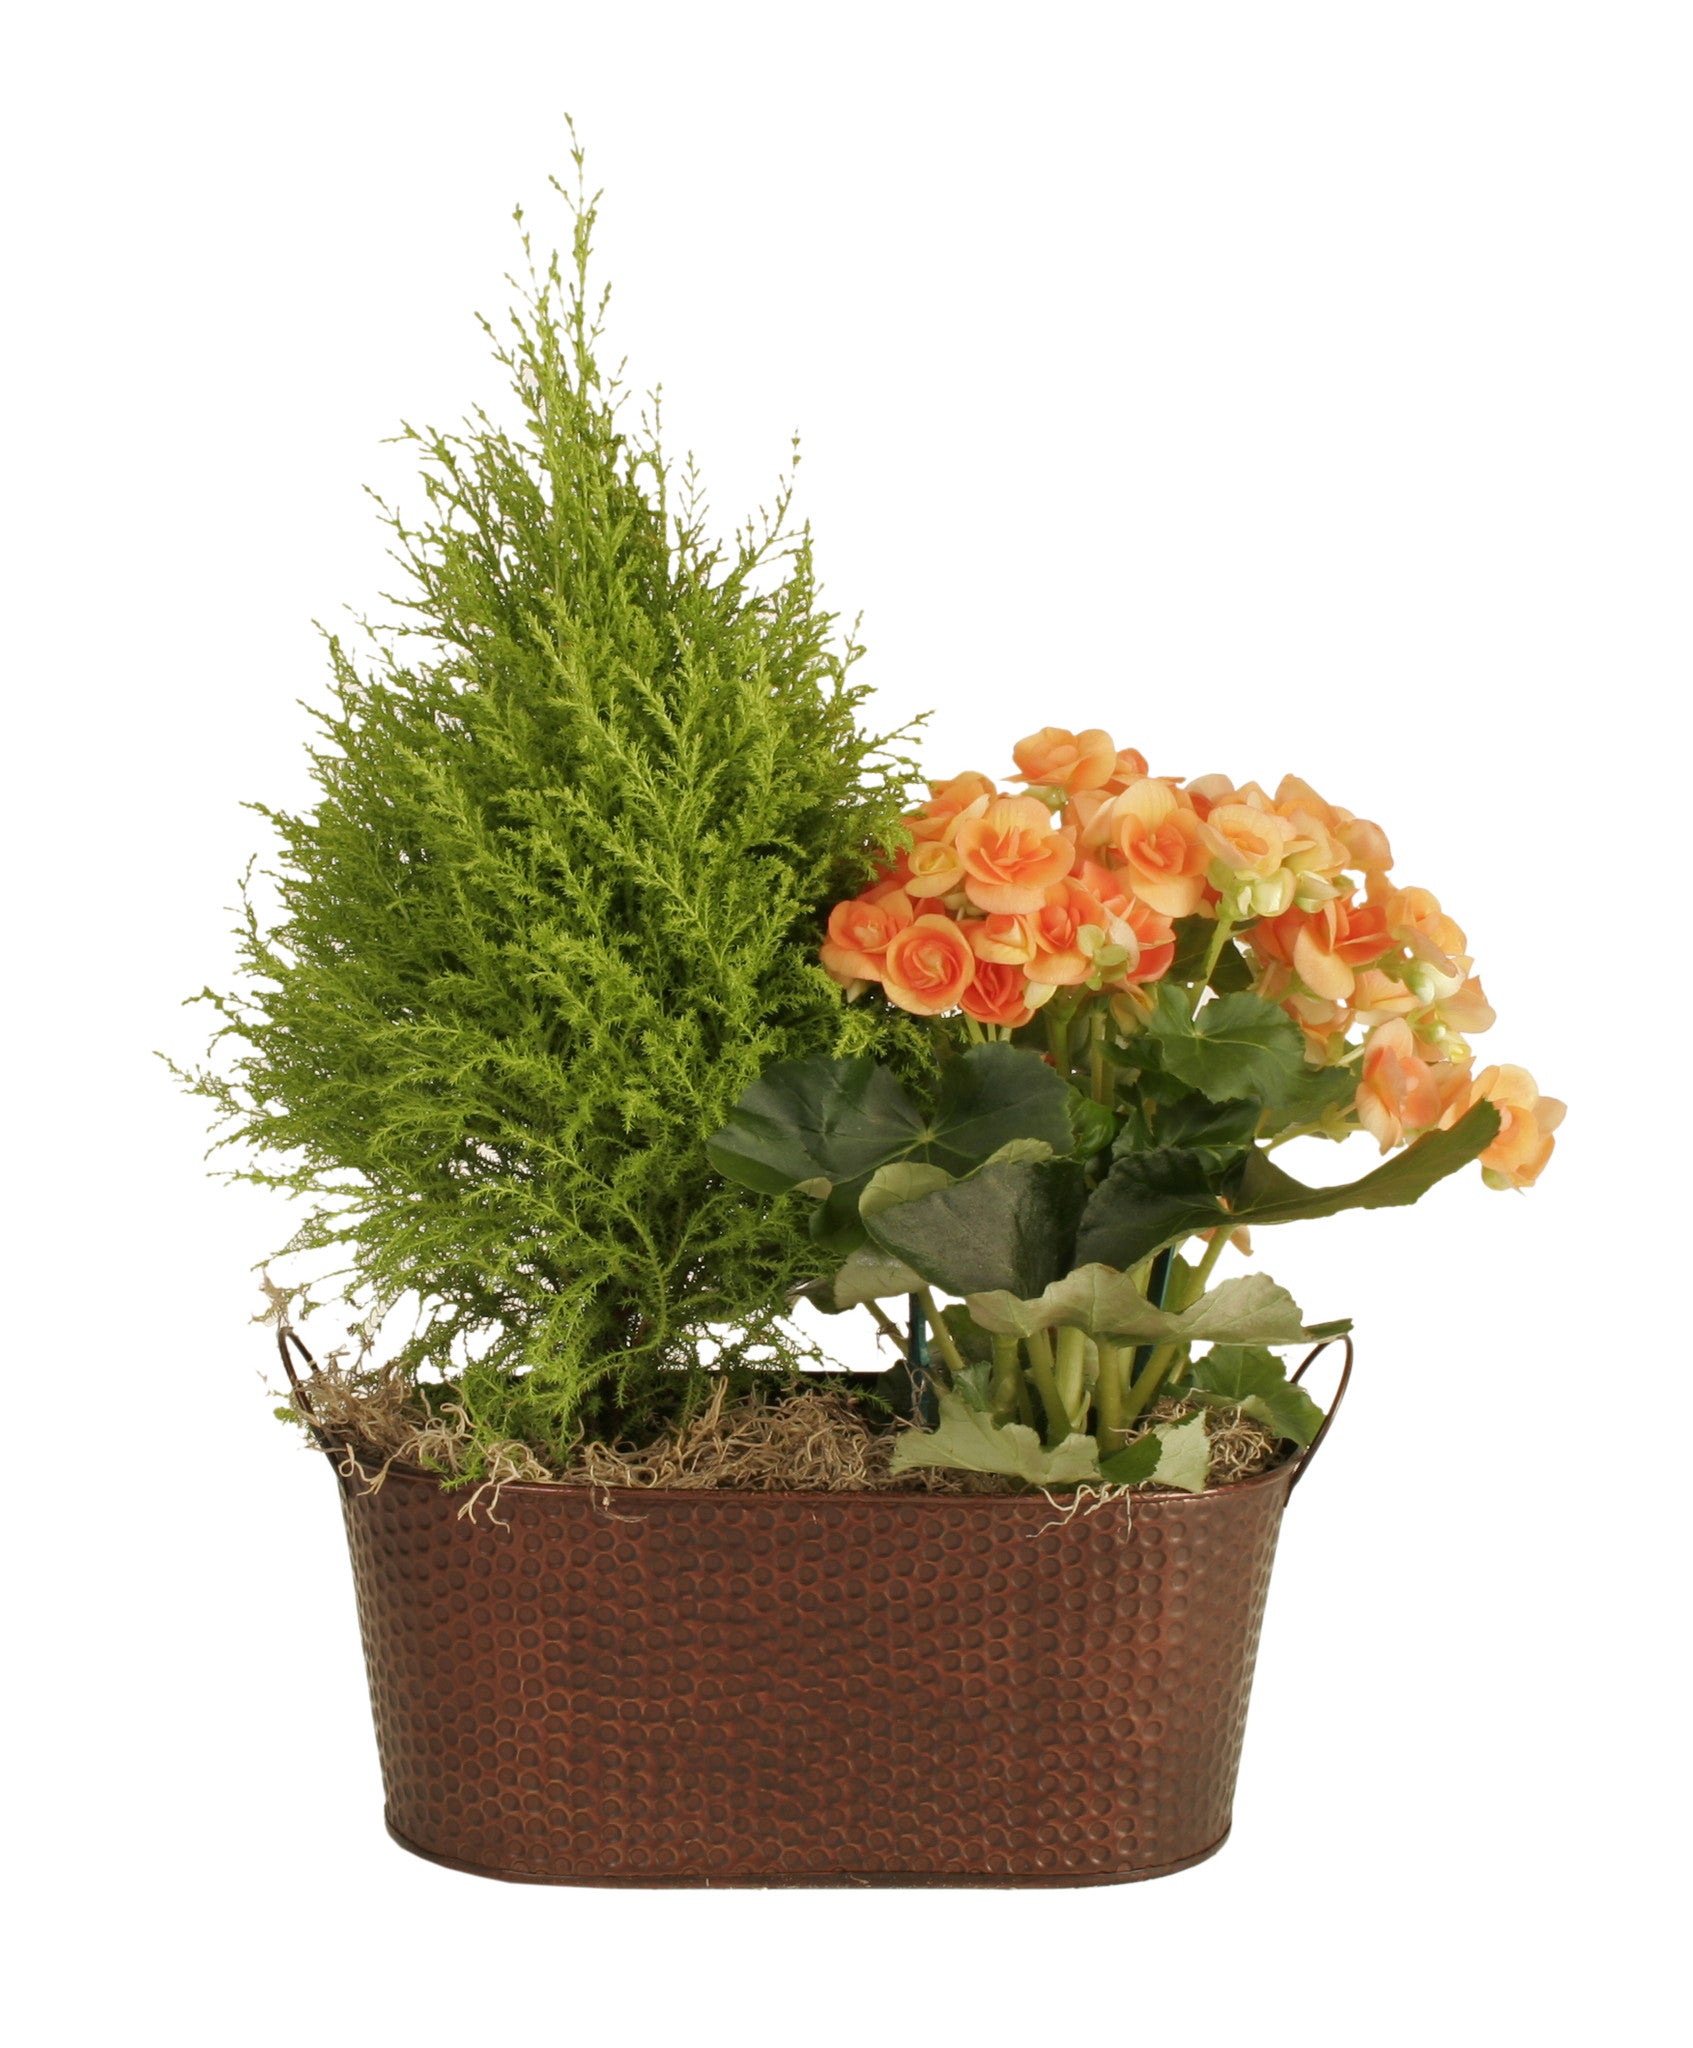 13.5" Oval Copper Tint Hammered Metal Planter-Wald Imports